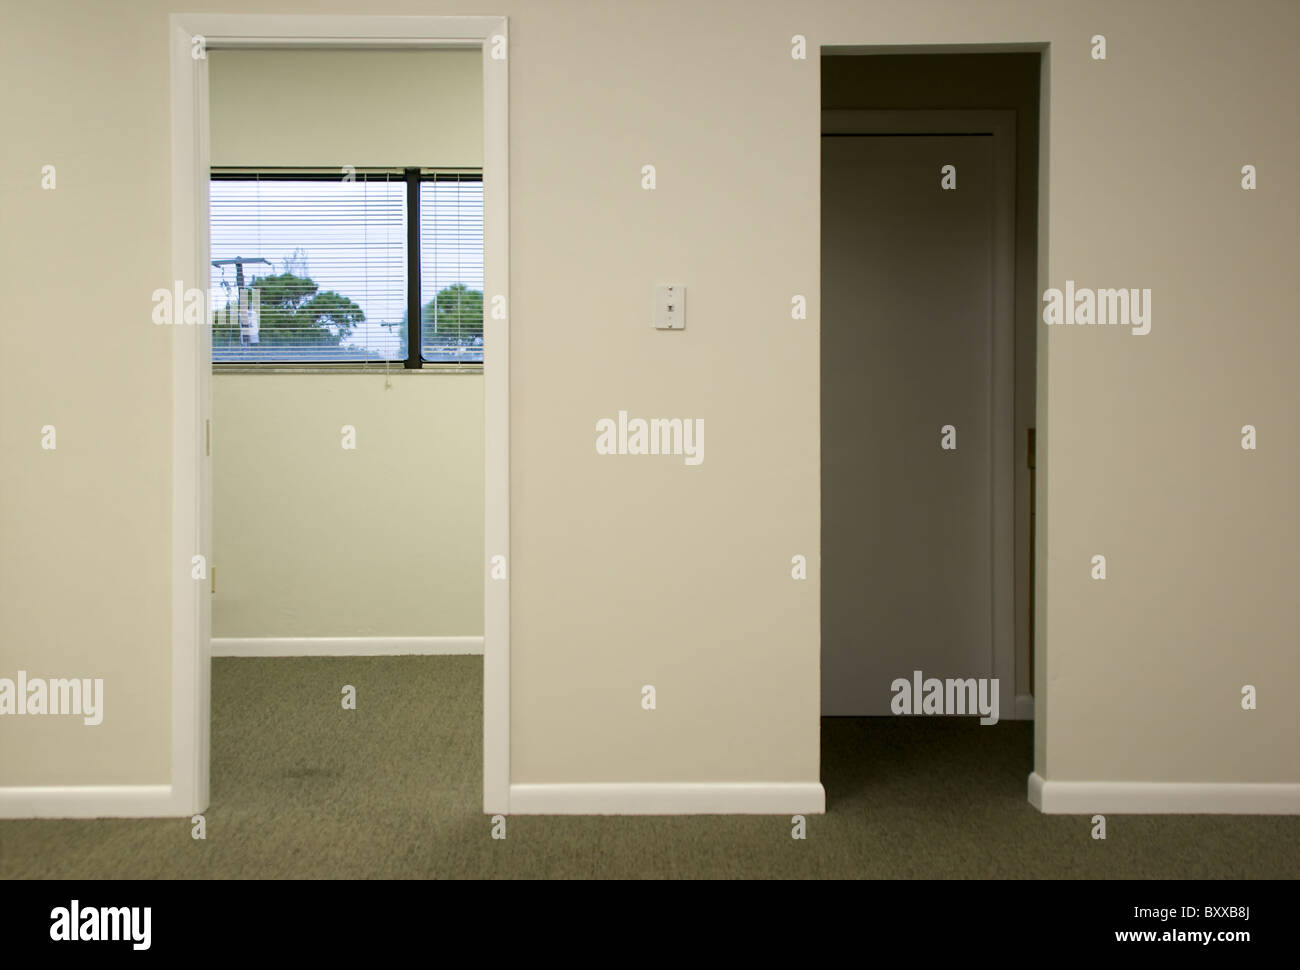 Two doorways in modern office space, one open door shows windows to the outside Stock Photo